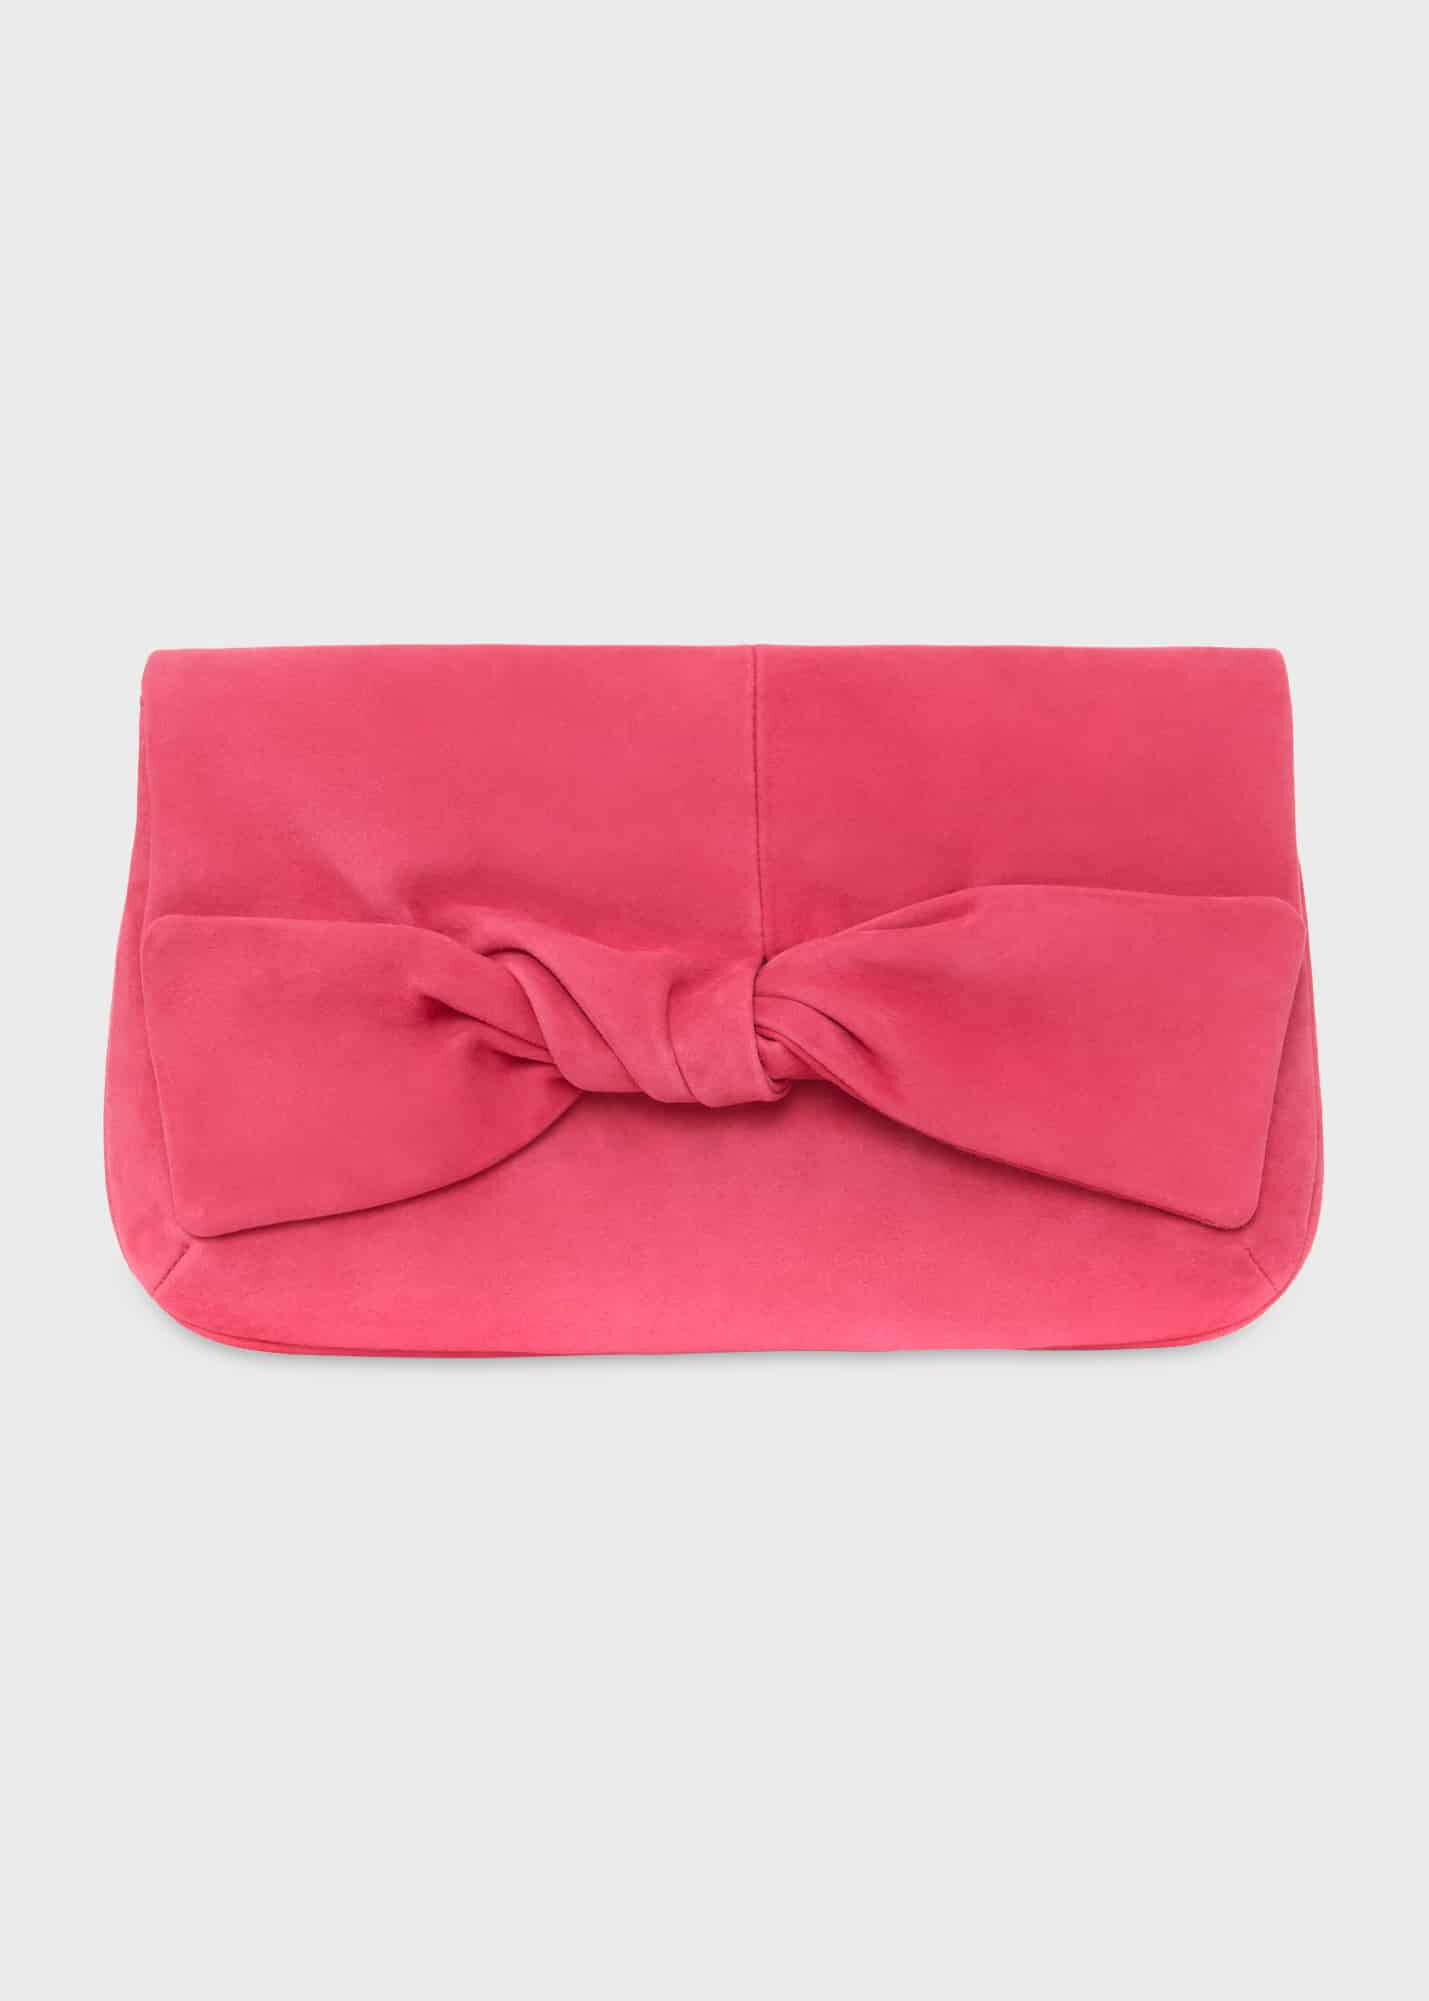 Judith Leiber Couture Crystal Bow Clutch Bag | Neiman Marcus